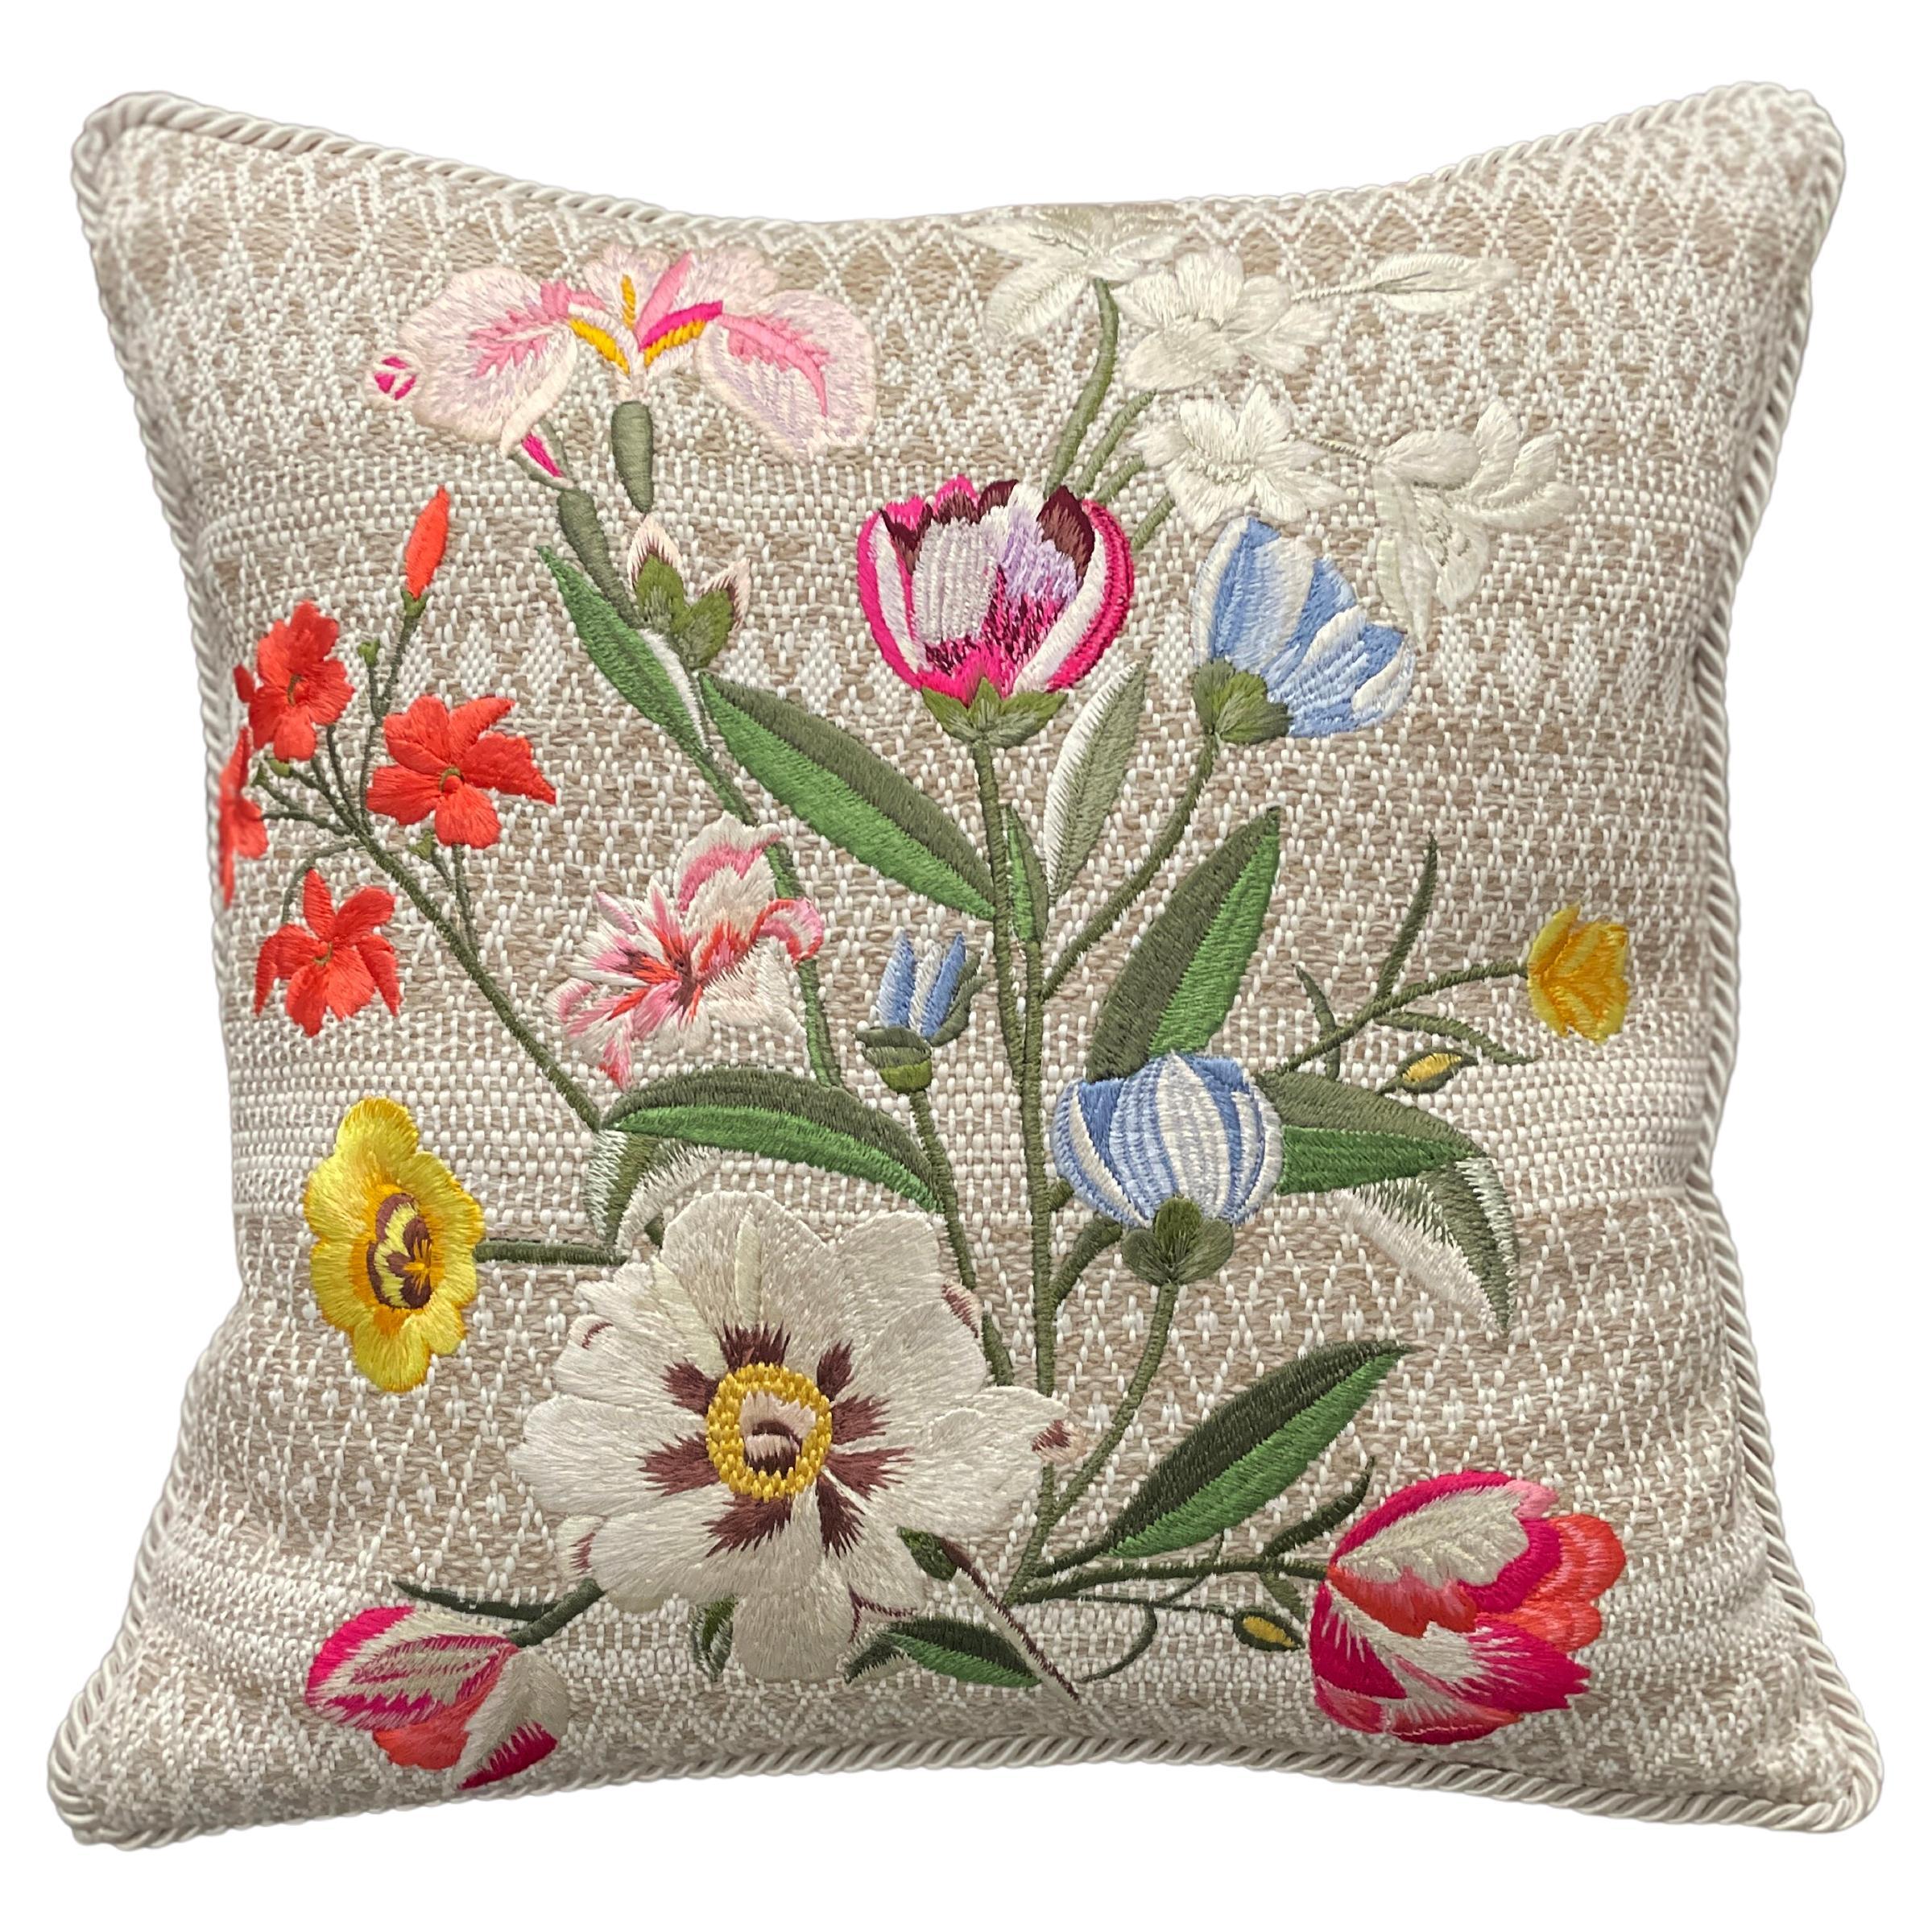 Spring Paeonia Bouquet Embroidered Beige Cotton Pillow with Corded Trim For Sale